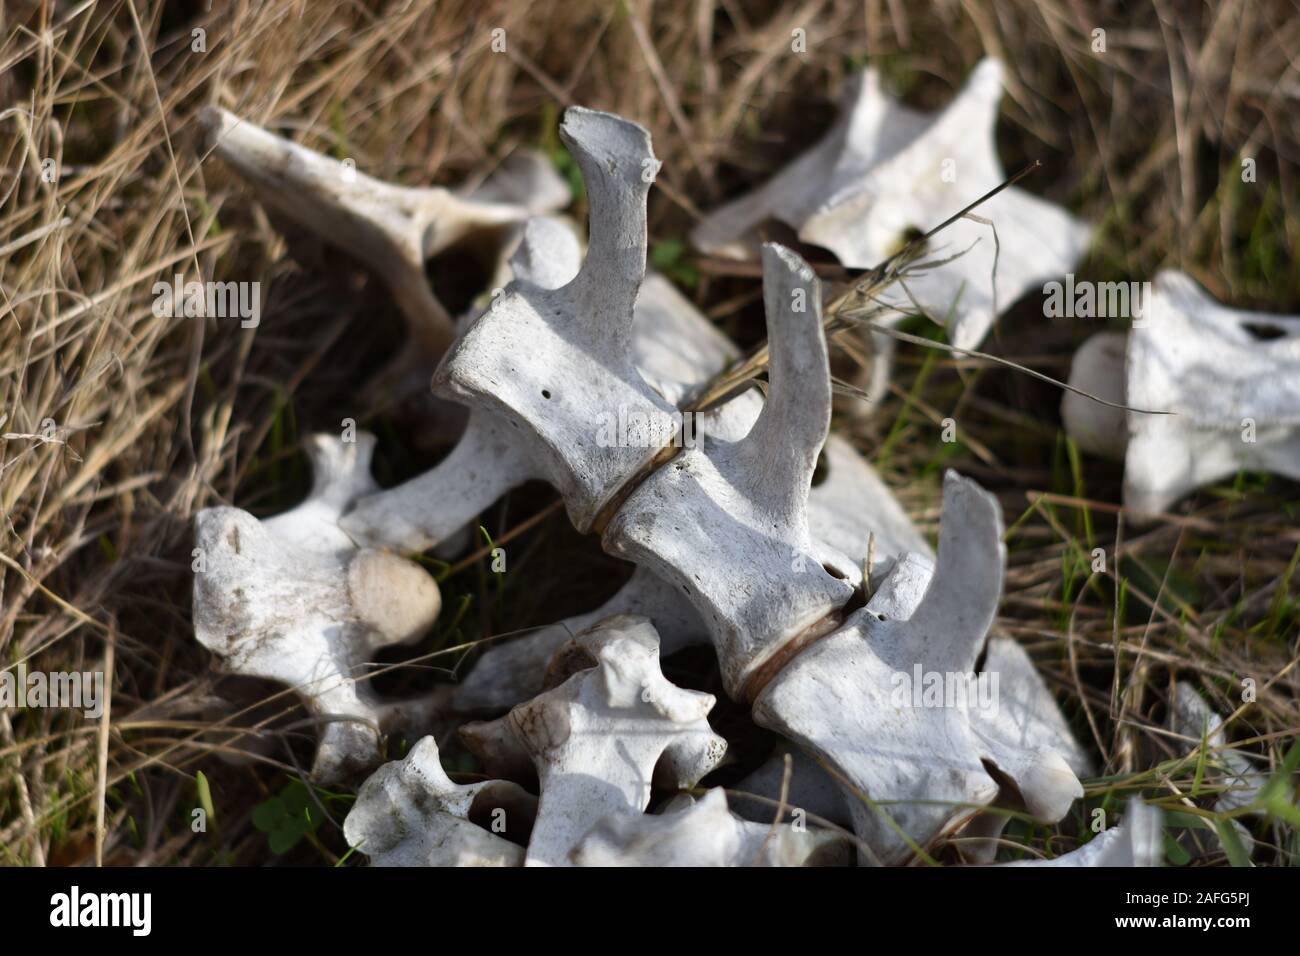 The bleached bones of a mule deer, scattered in brown grass on Hummingbird Island in Elkhorn Slough in California Stock Photo